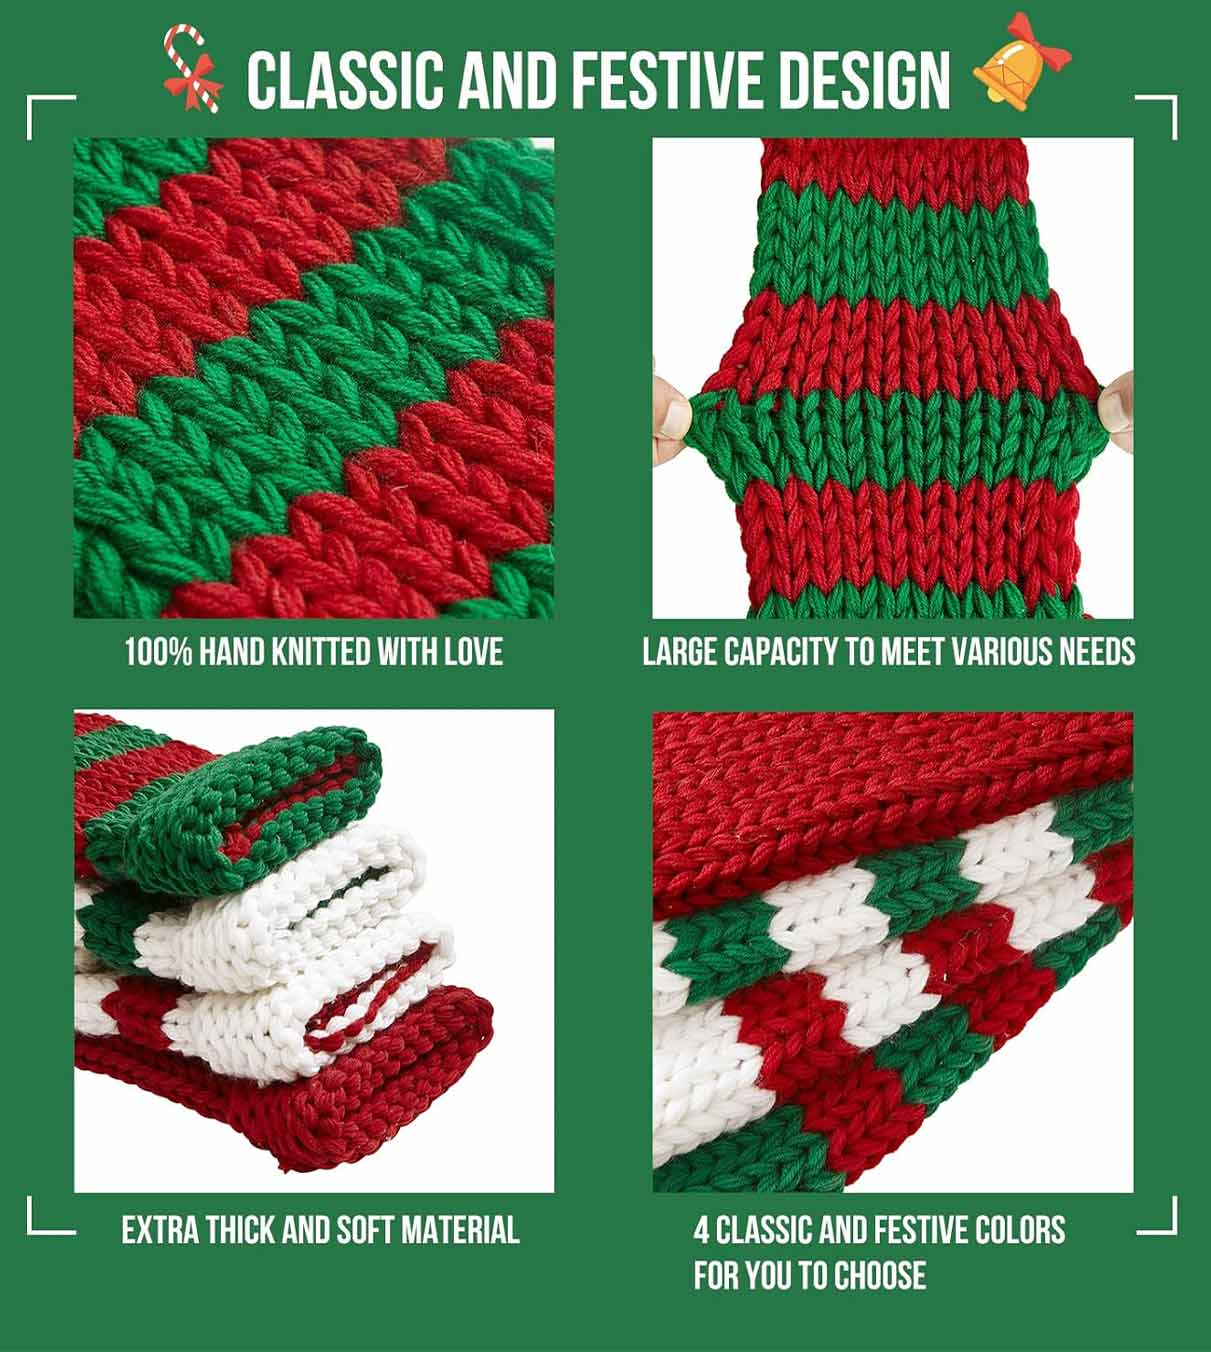 Product: Christmas Stockings | Color: Red Green